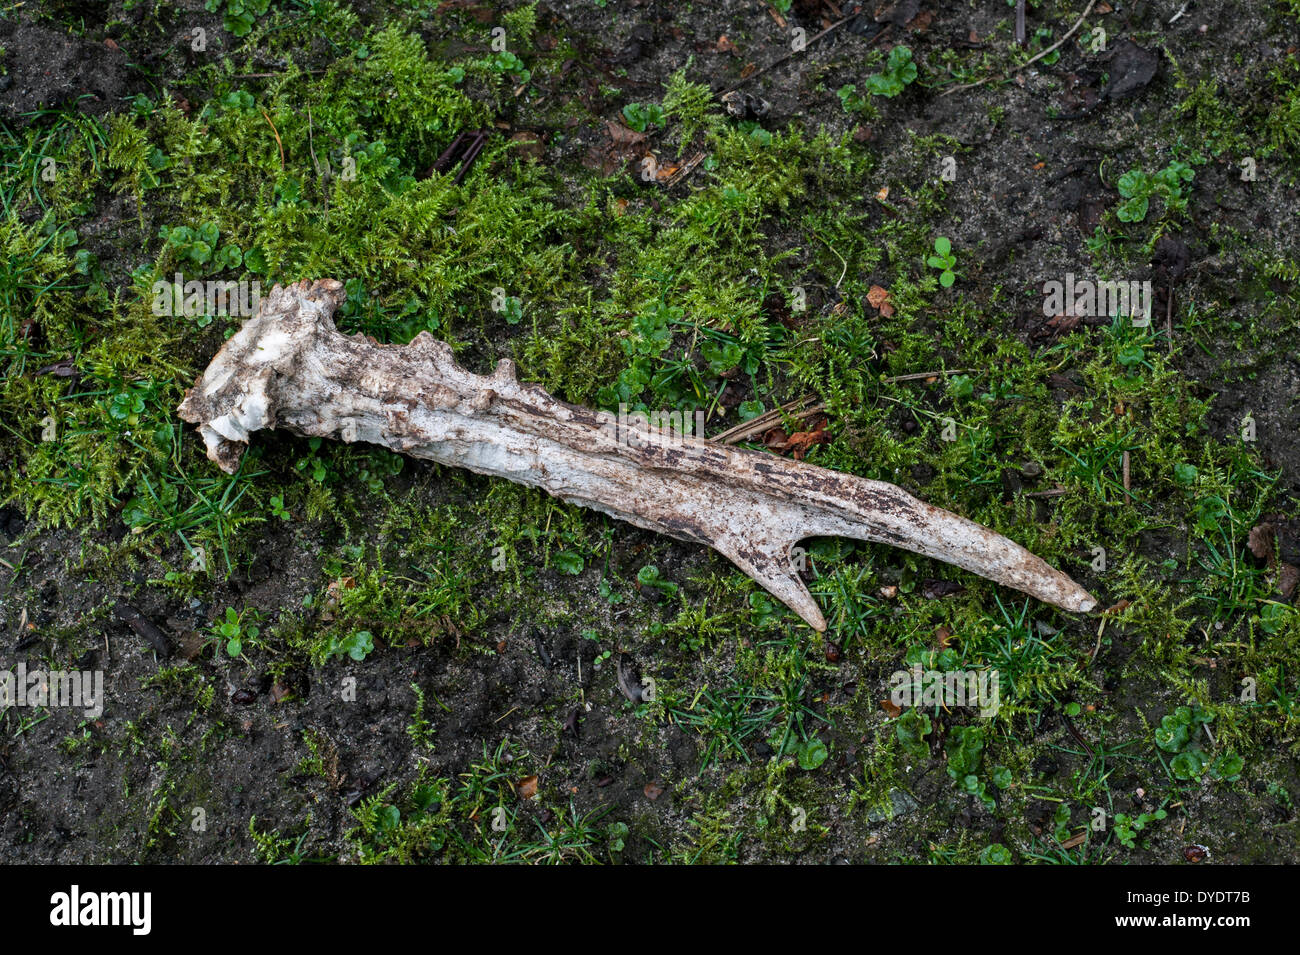 European roe deer (Capreolus capreolus) shed antler on forest floor showing teeth marks, gnawed upon by rodents for the minerals Stock Photo